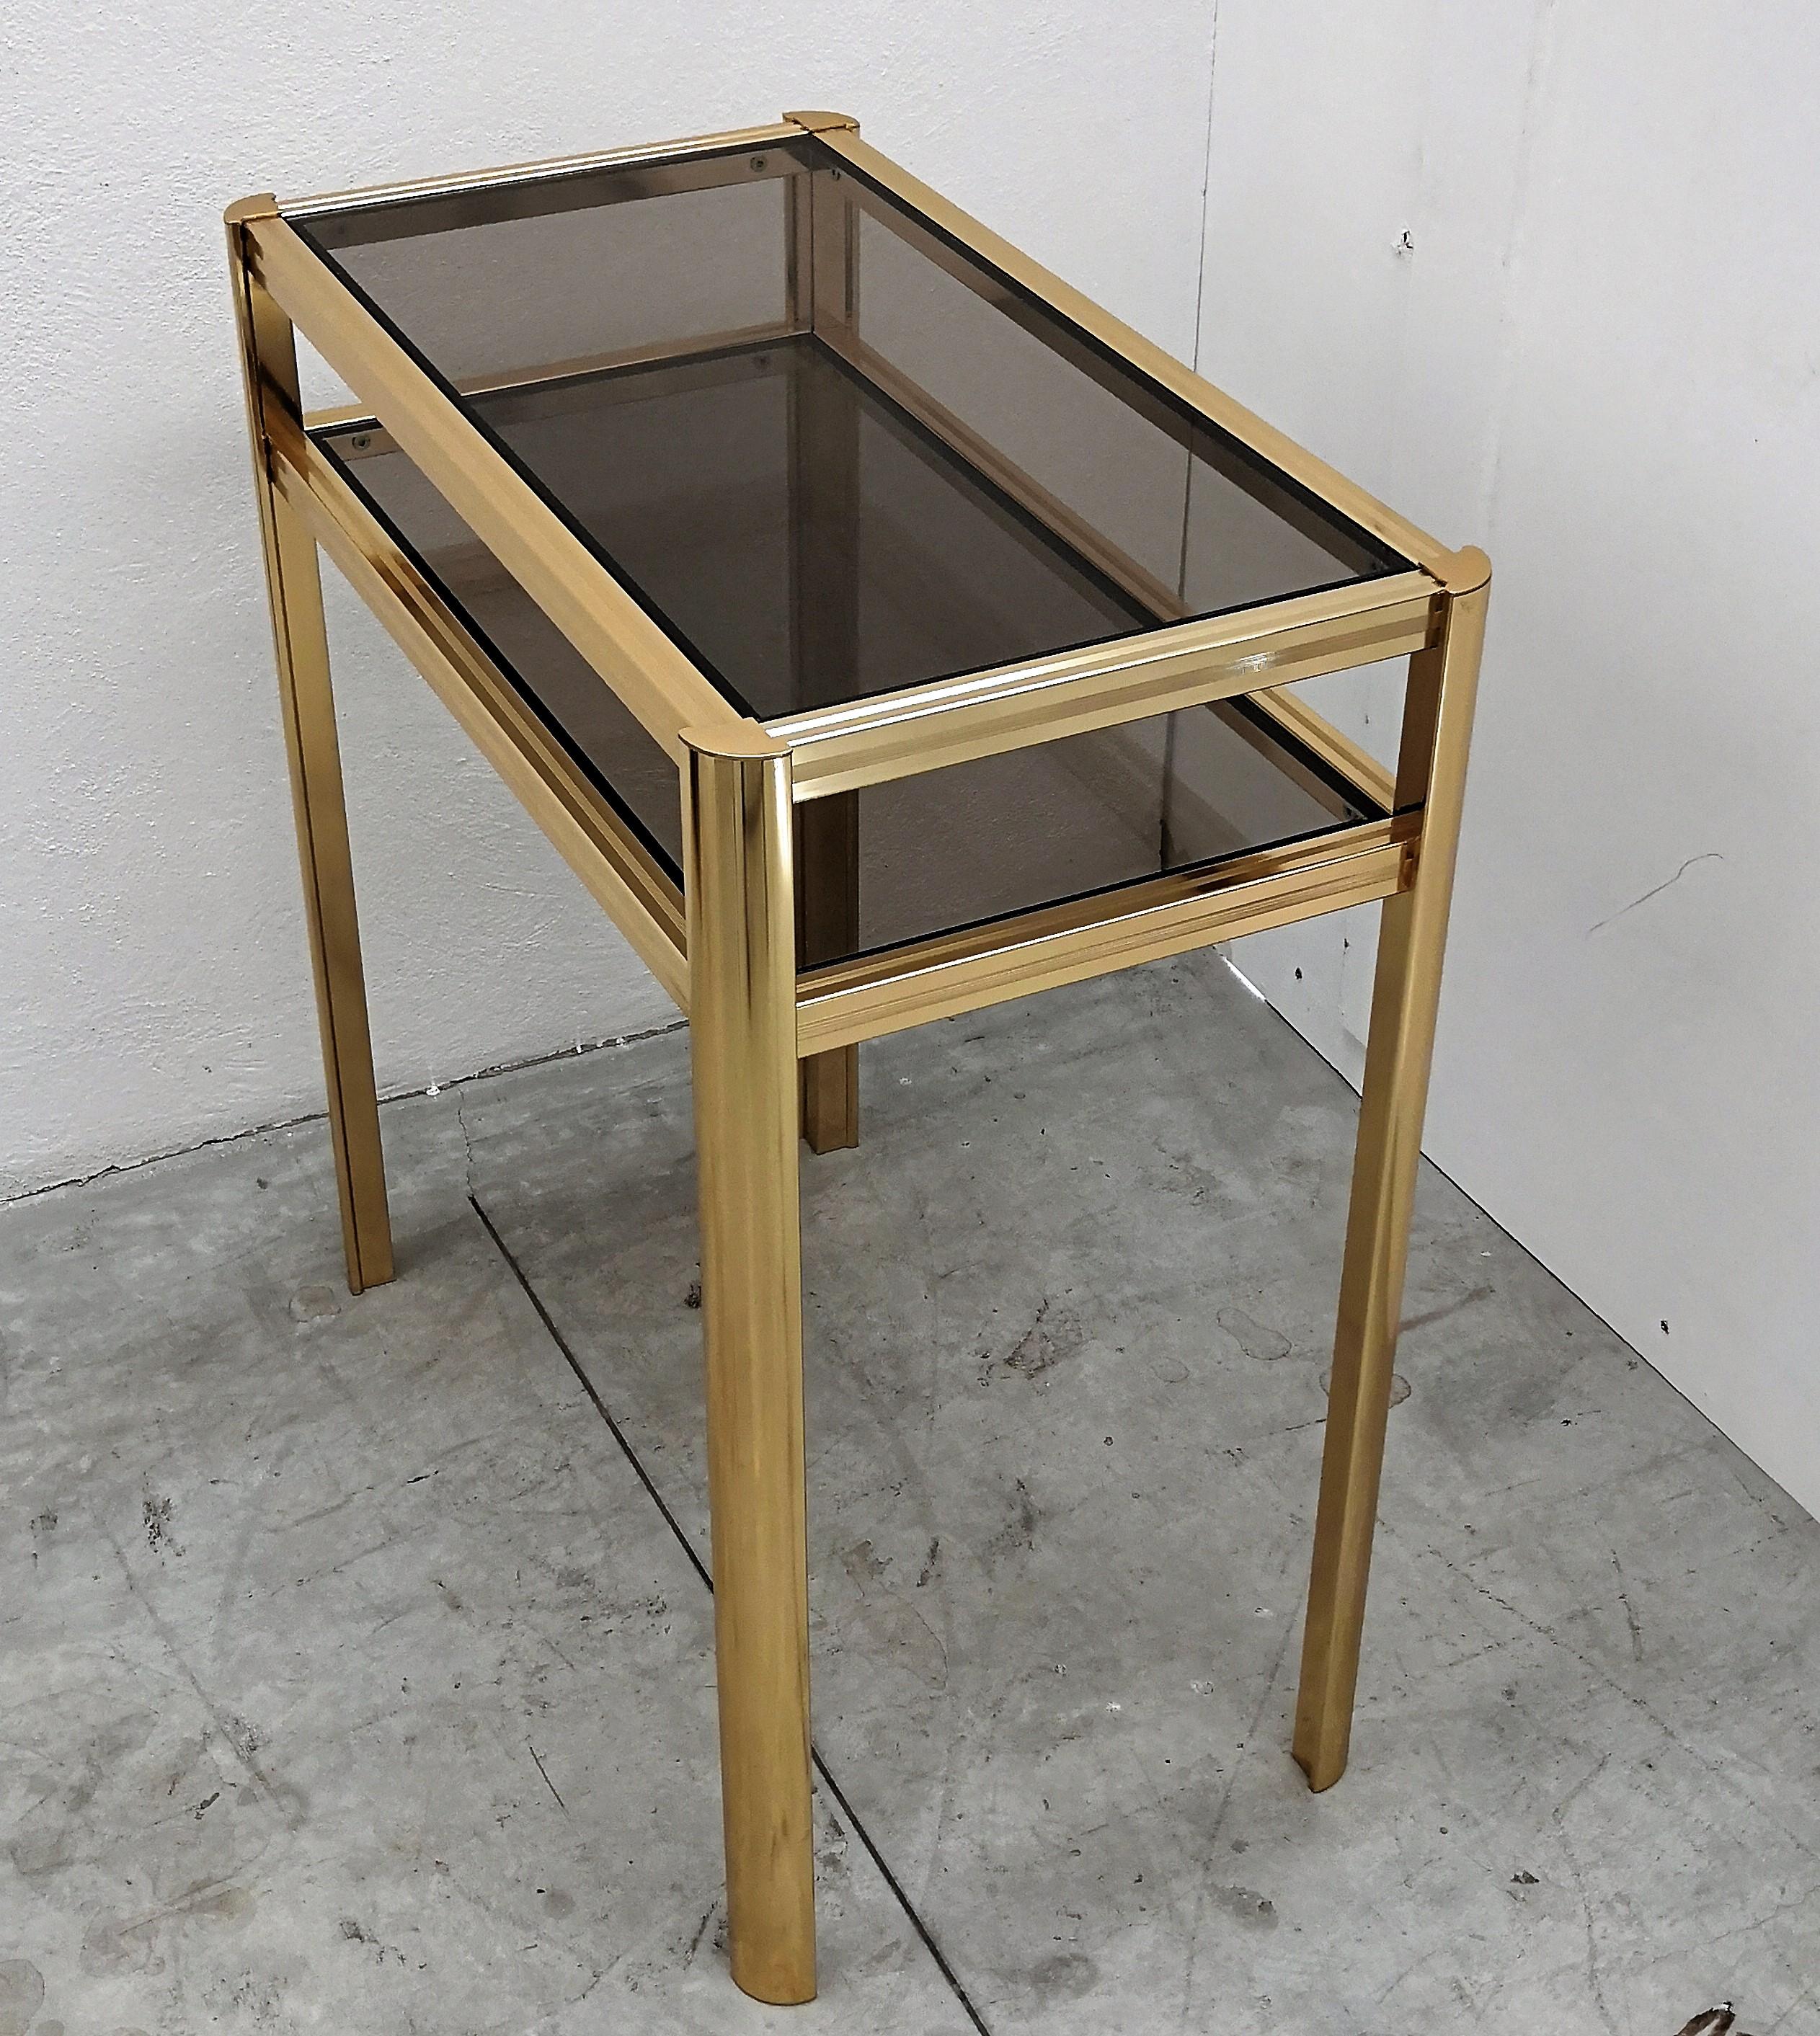 Beautiful and stylish vintage 1980s Italian brass console with two smoked glass shelves. 
A great piece that perfectly adds to every home decor the typical glitz, glamour and gold of Hollywood Regency style, with a nod to Art Deco decadence and